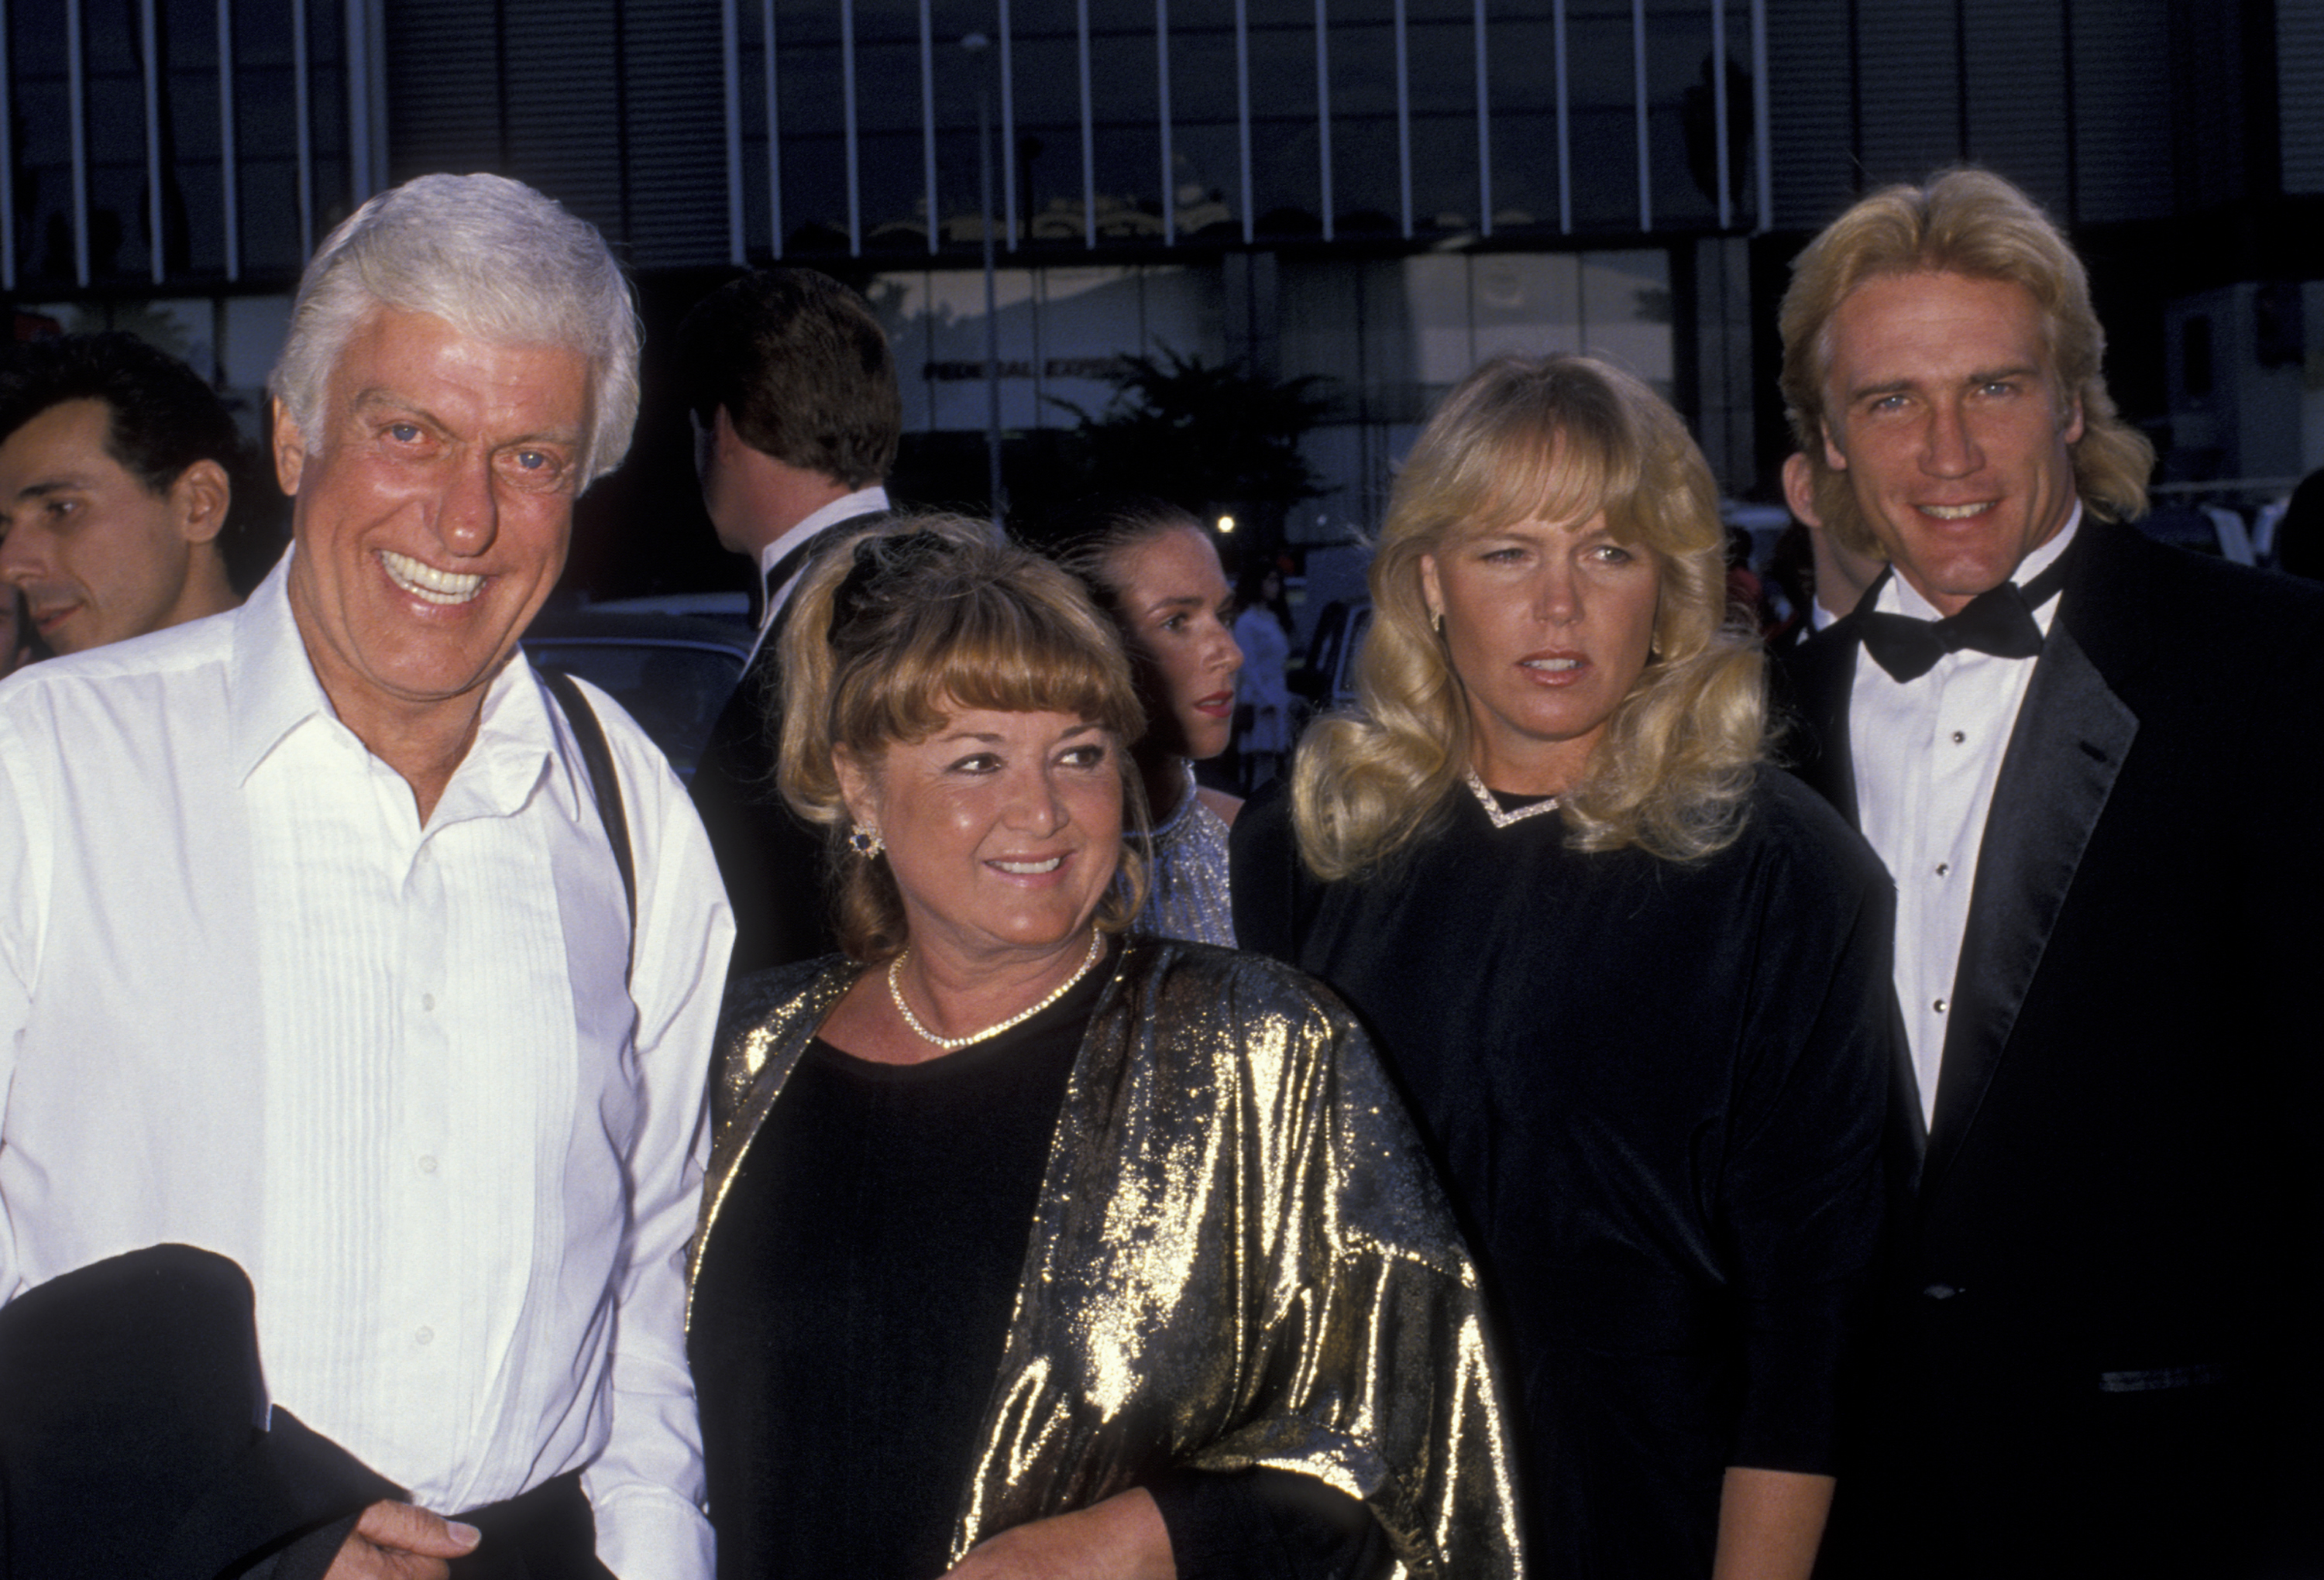 Dick Van Dyke, Michelle Triola, son Barry Van Dyke and wife Mary Van Dyke attend the Third Annual American Comedy Awards at the Hollywood Palladium on May 23, 1989 in Hollywood, California | Source: Getty Images